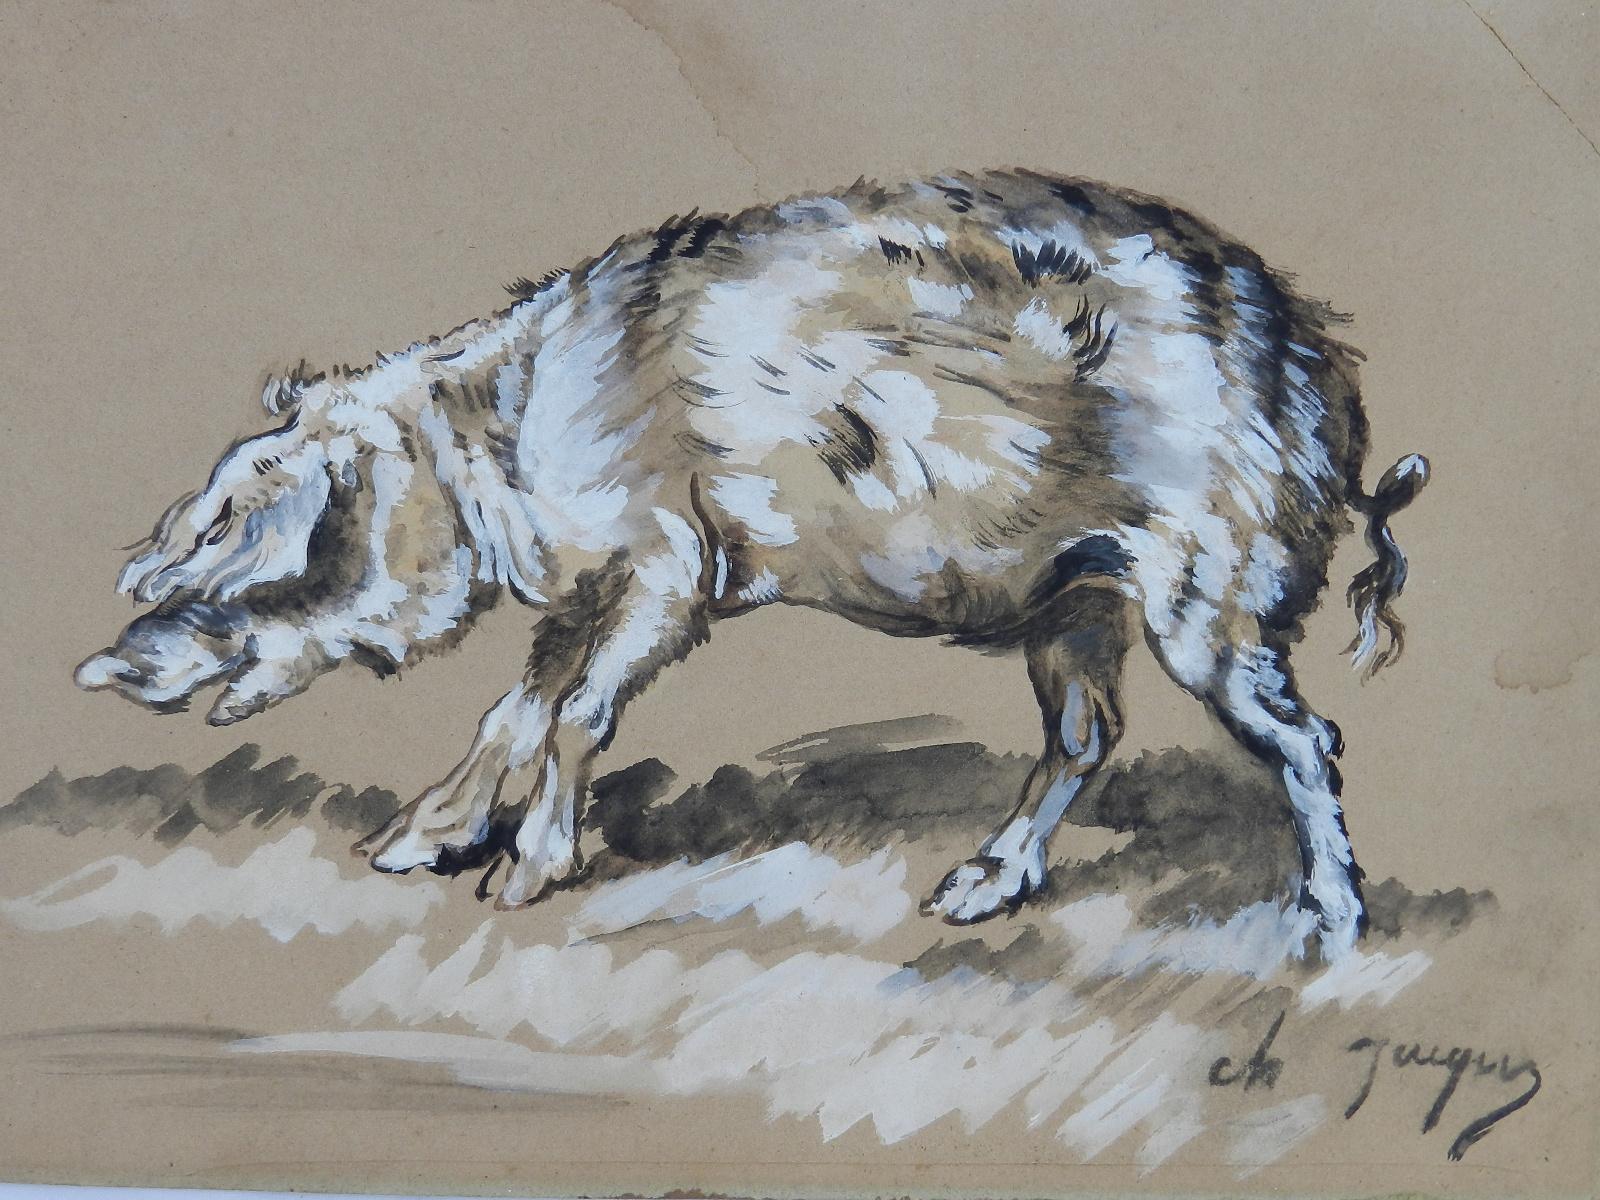 French Watercolour Study Sketch of Pig by Charles Jacque Barbizon School c1830-50
Charles Jacque 1813-1894
One of the inner circle artists of the famous Ecole Barbizon
Really charming study probably in preparation for a larger piece
Right hand top